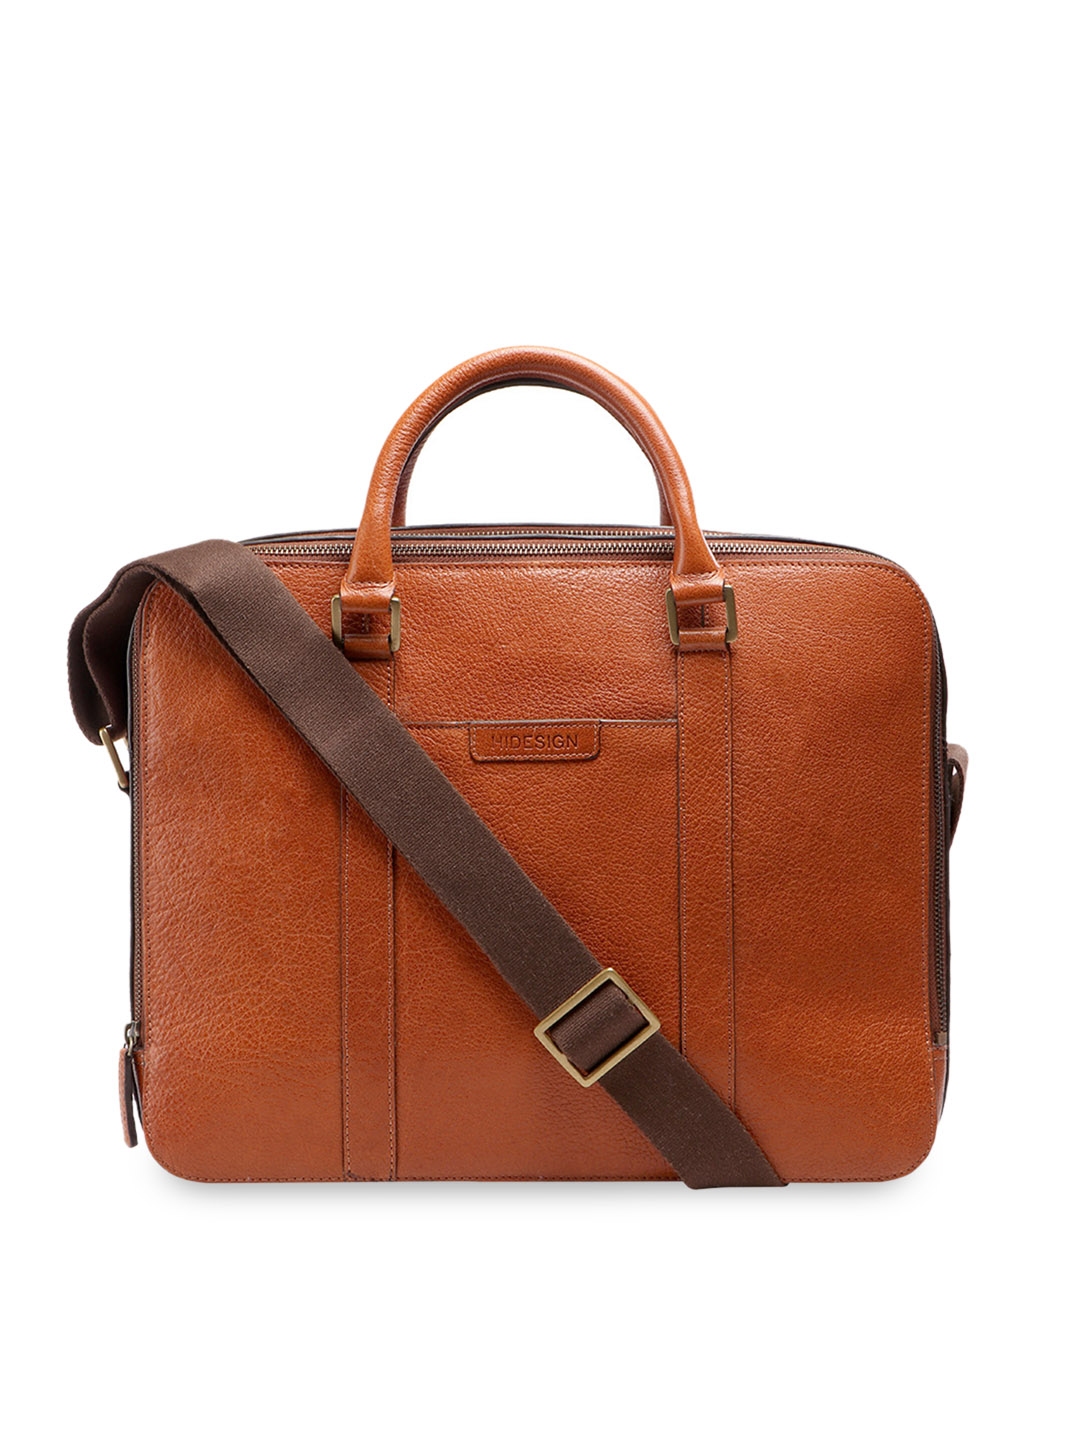 hidesign leather bags